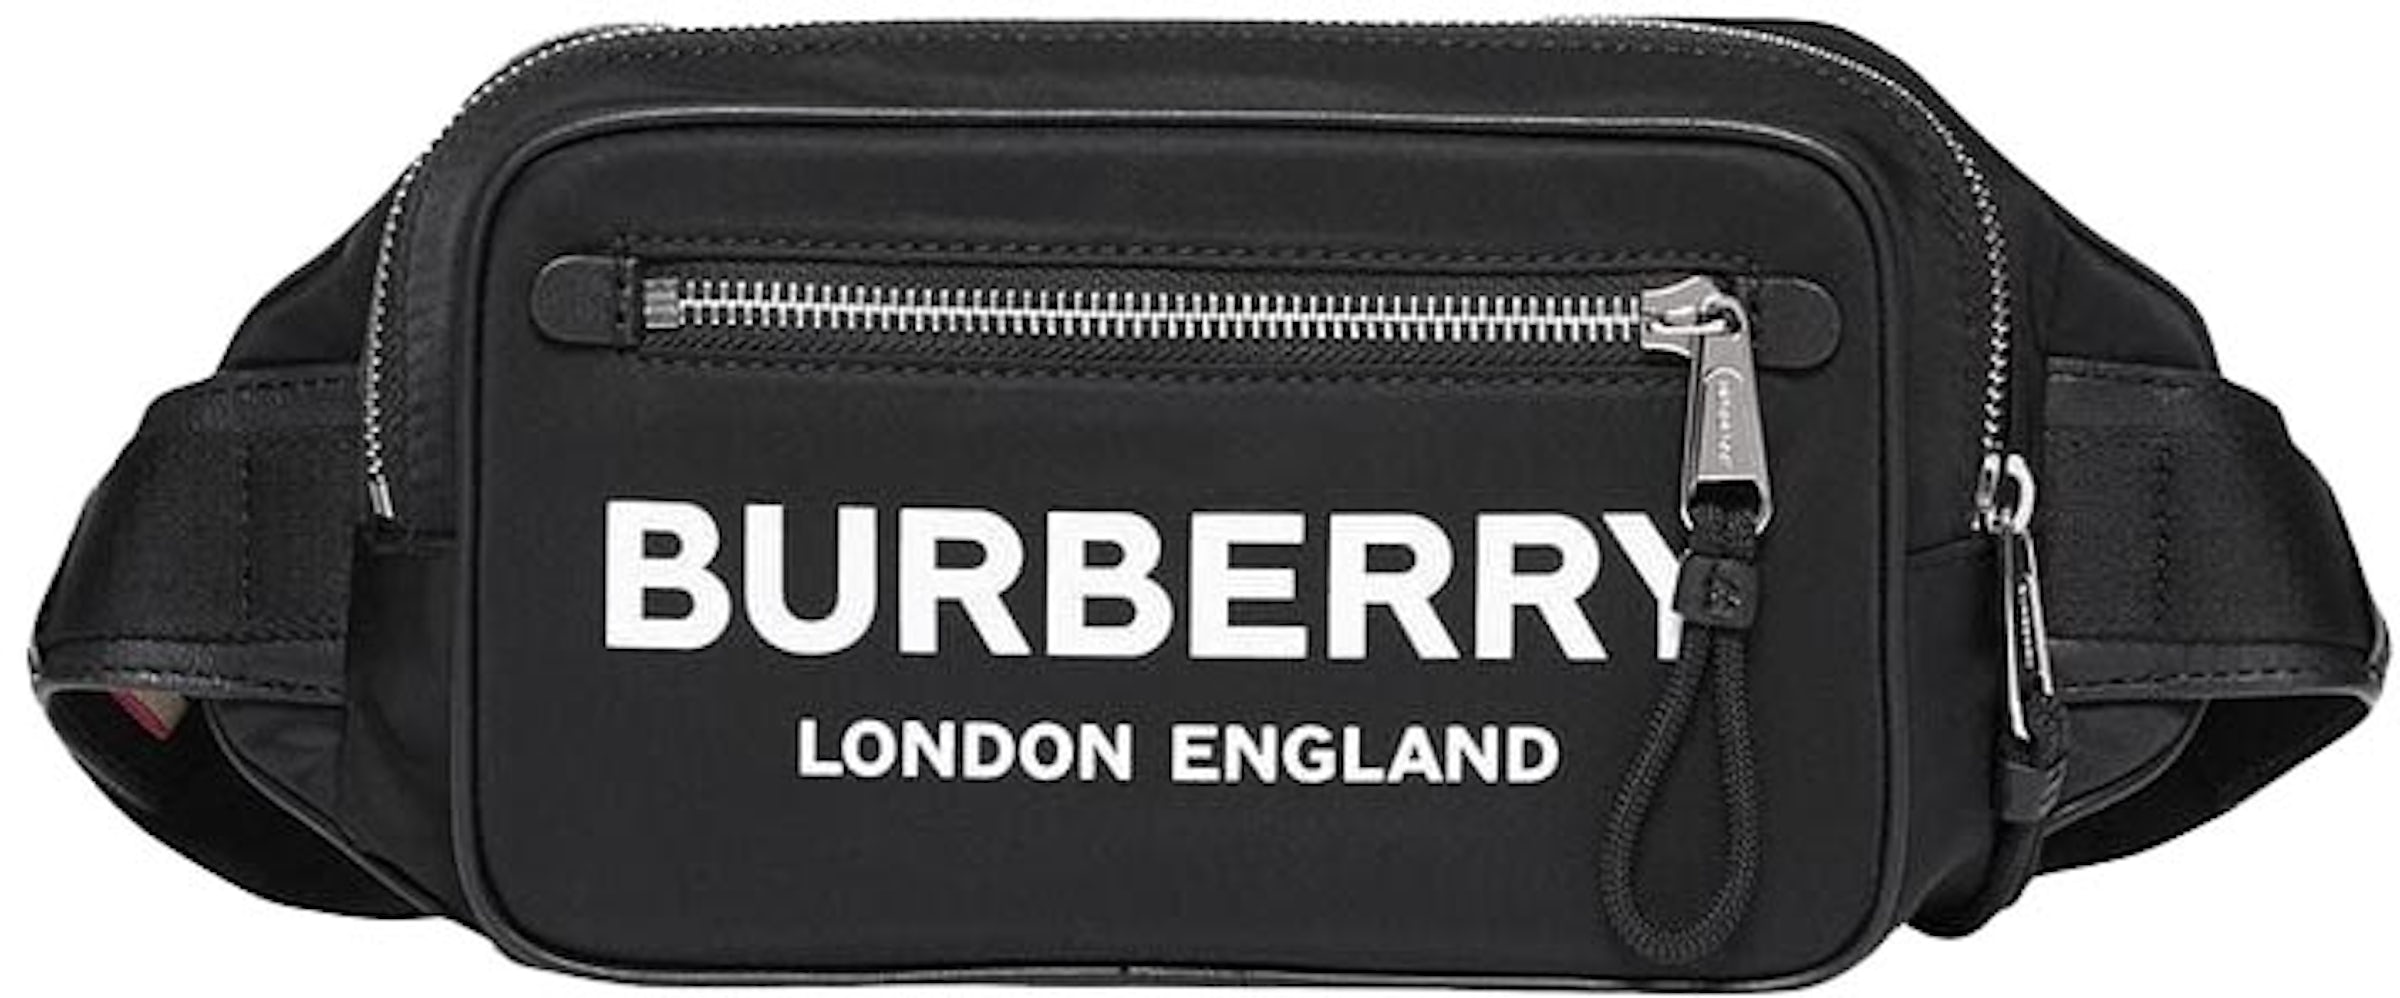 Burberry medium size carry on travel bag Made in England